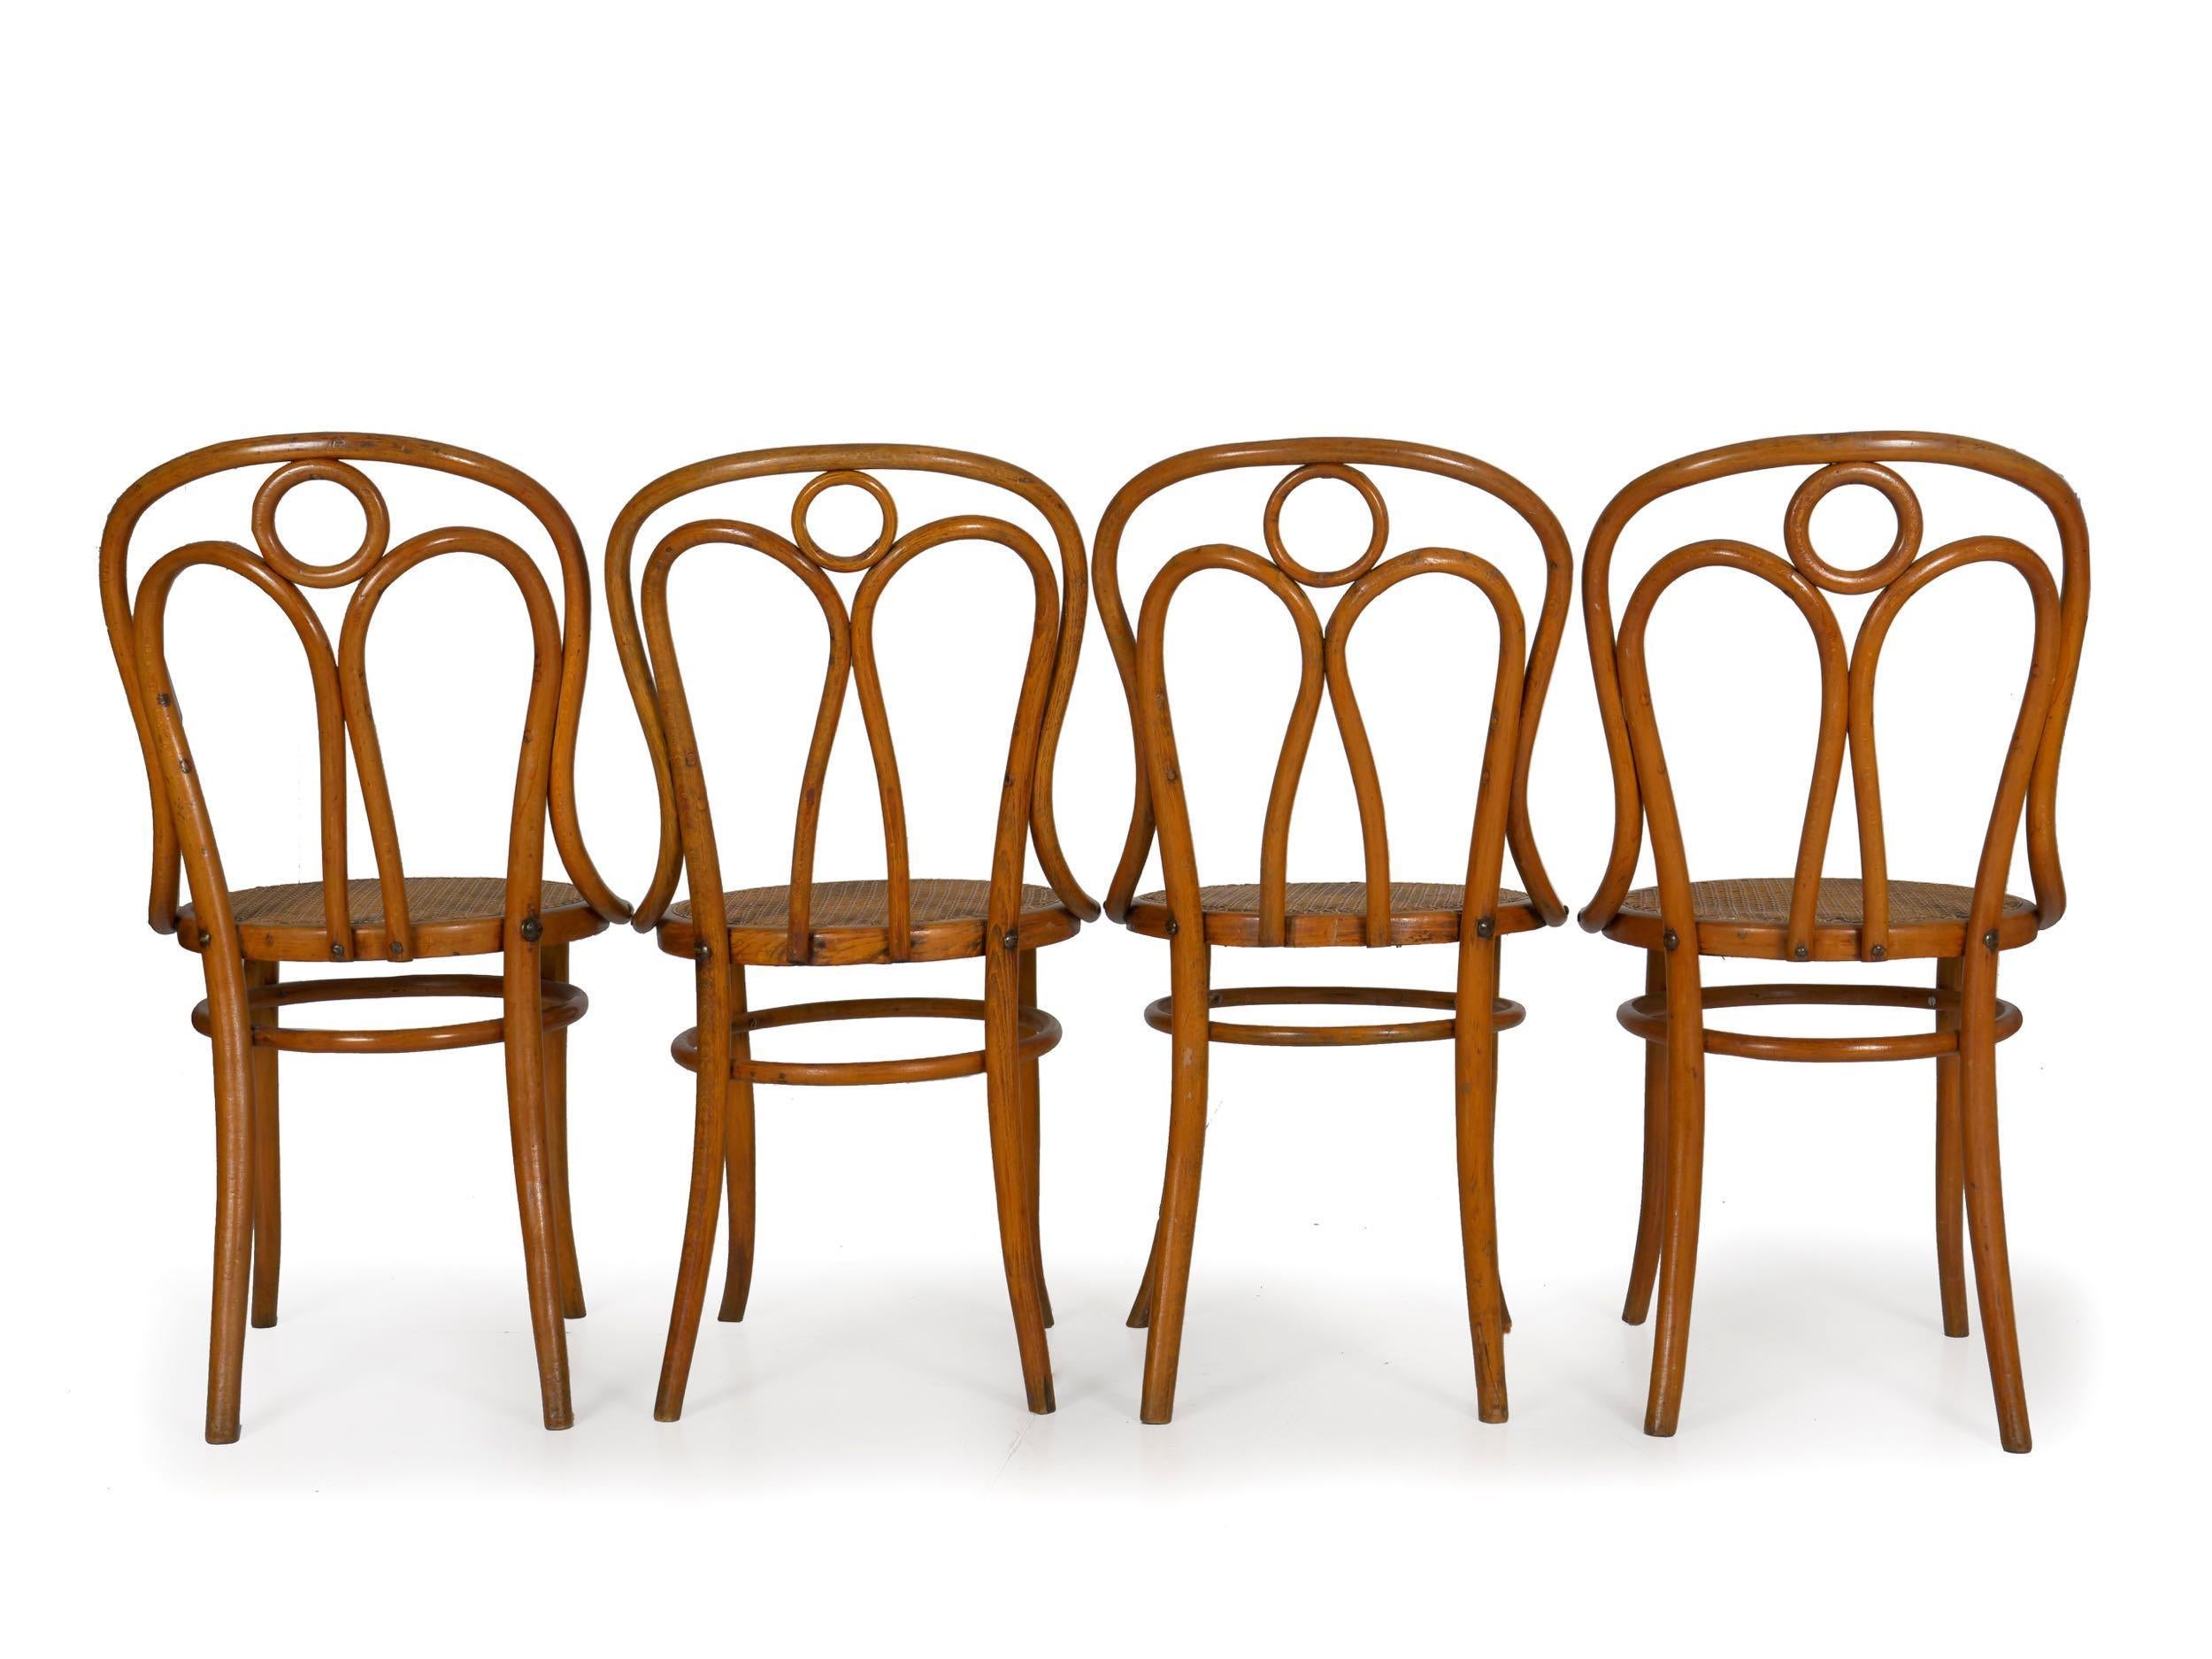 Early 20th Century Set of Four Austrian Bentwood Vintage “Angel Chairs” No. 36 by Josef Kohn